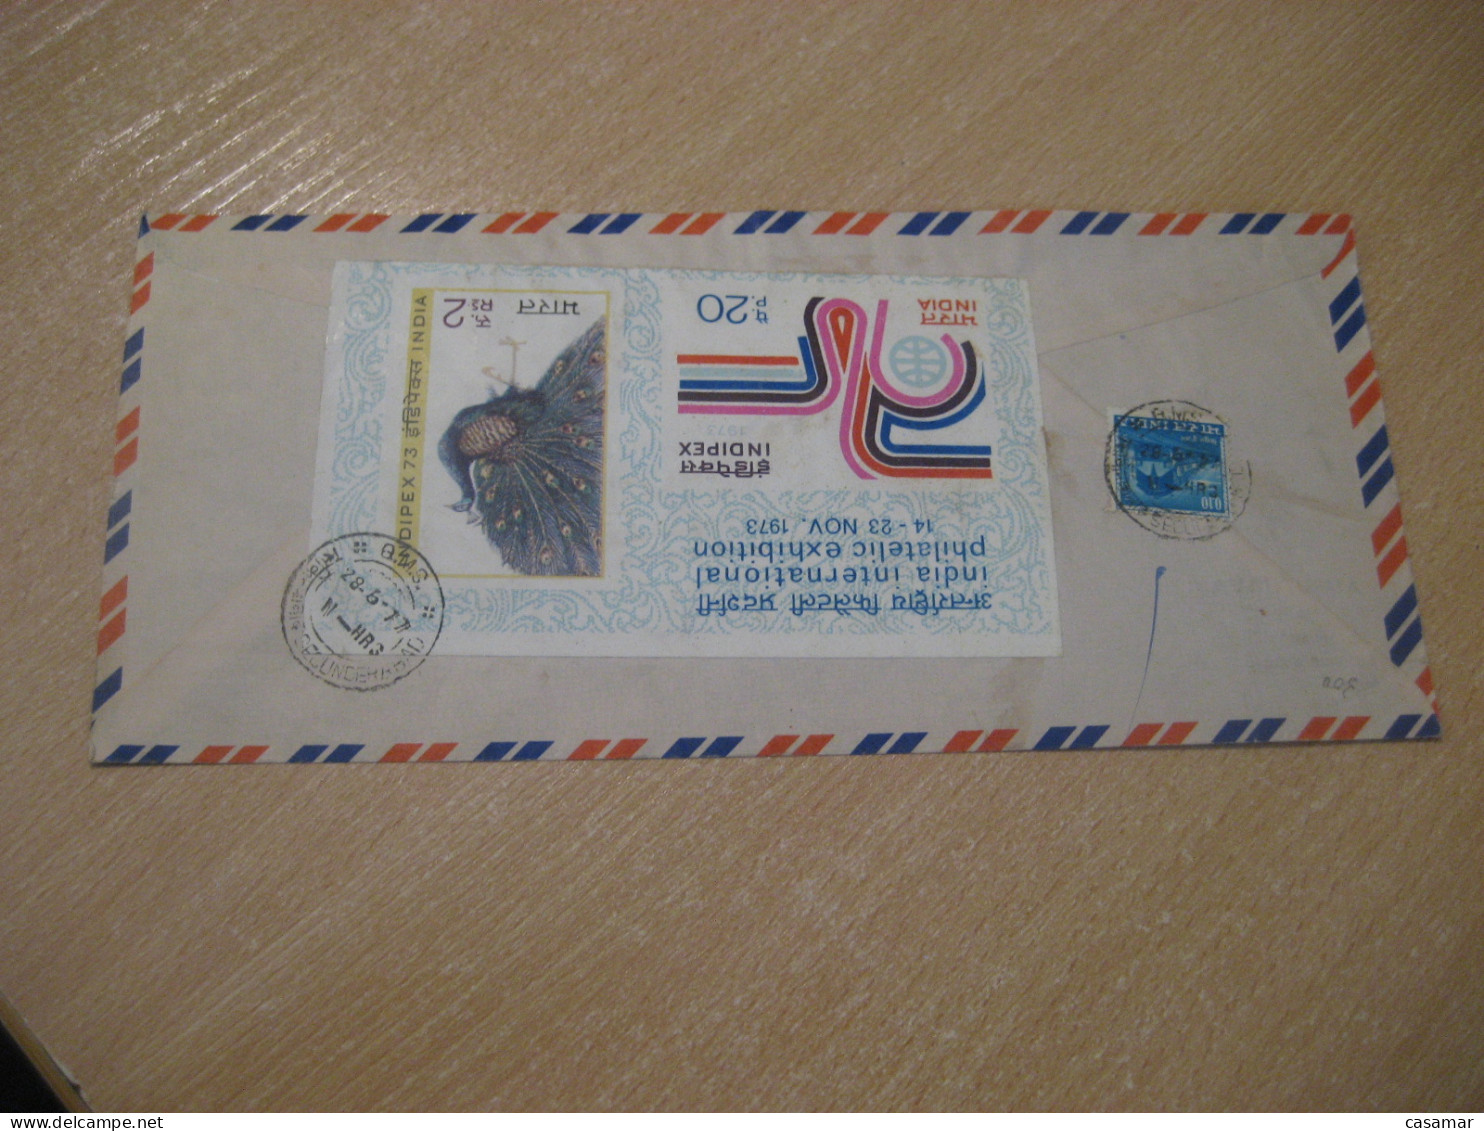 SECUNDERABAD 1977 To Barcelona Spain Phil. Ex. INDIPEX Bloc Peacock Air Mail Cancel Cover INDIA INDE - Briefe U. Dokumente